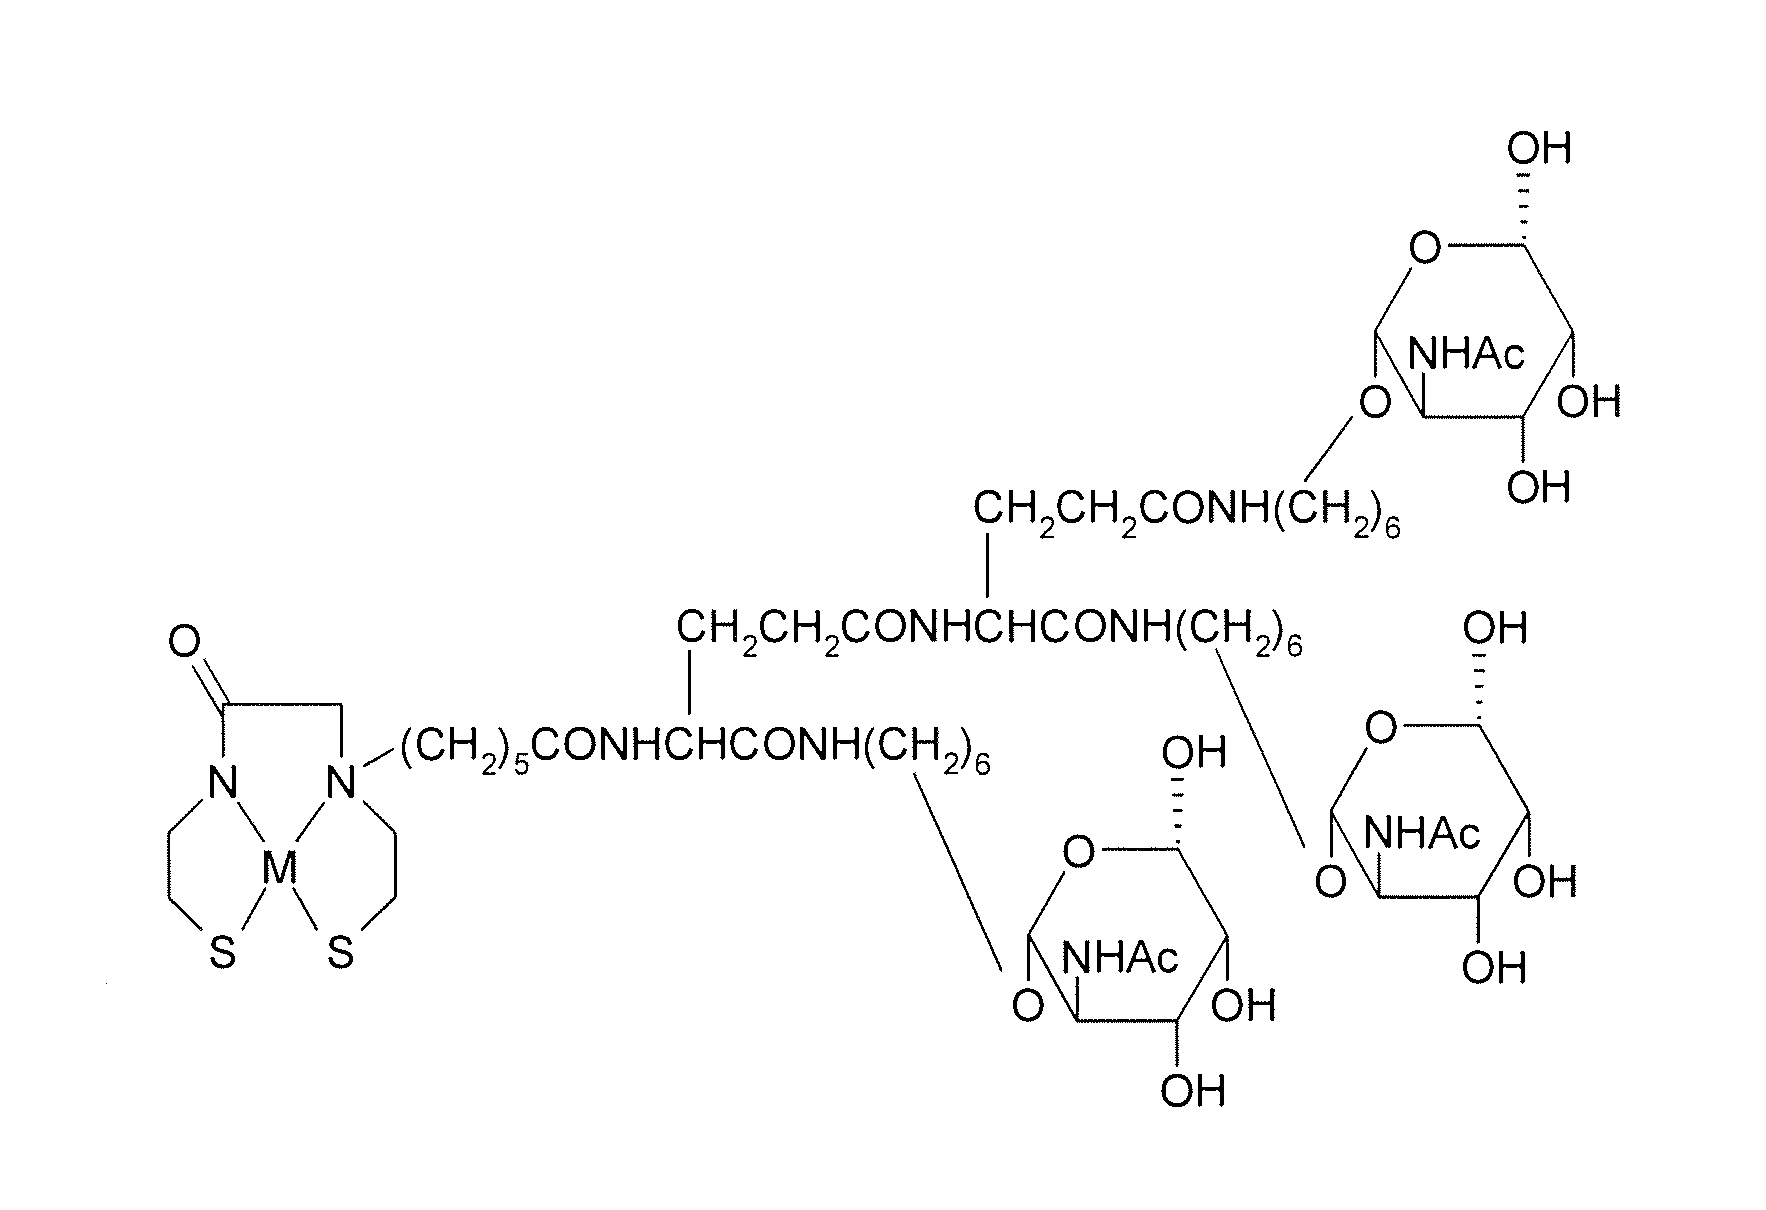 Precursor used for labeling hepatorcyte receptor and containing trisaccharide and diamide demercaptide ligand, method for preparing the same, radiotracer and pharmaceutical composition of the same